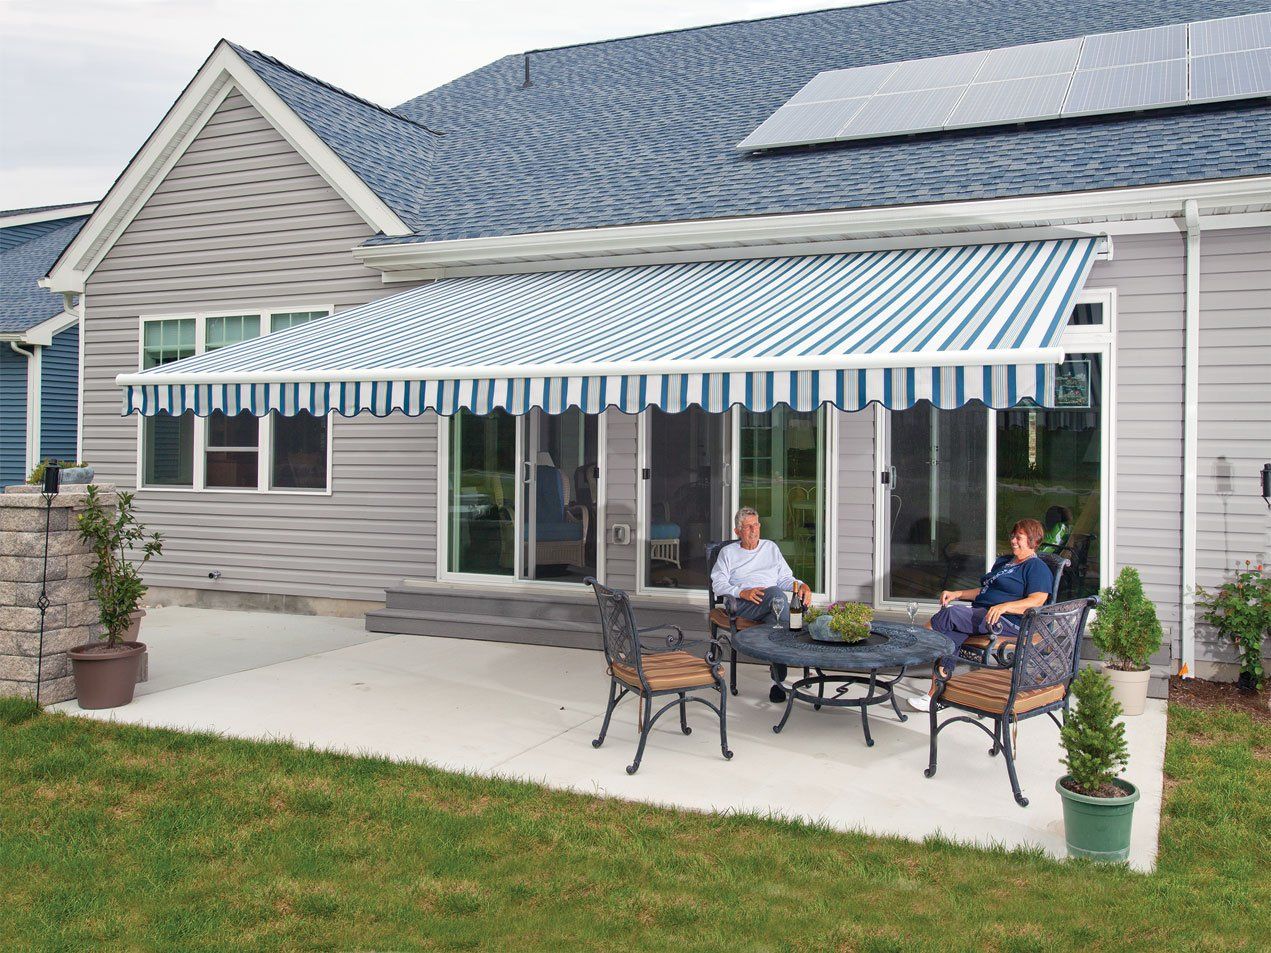 awning protecting outdoor patio area